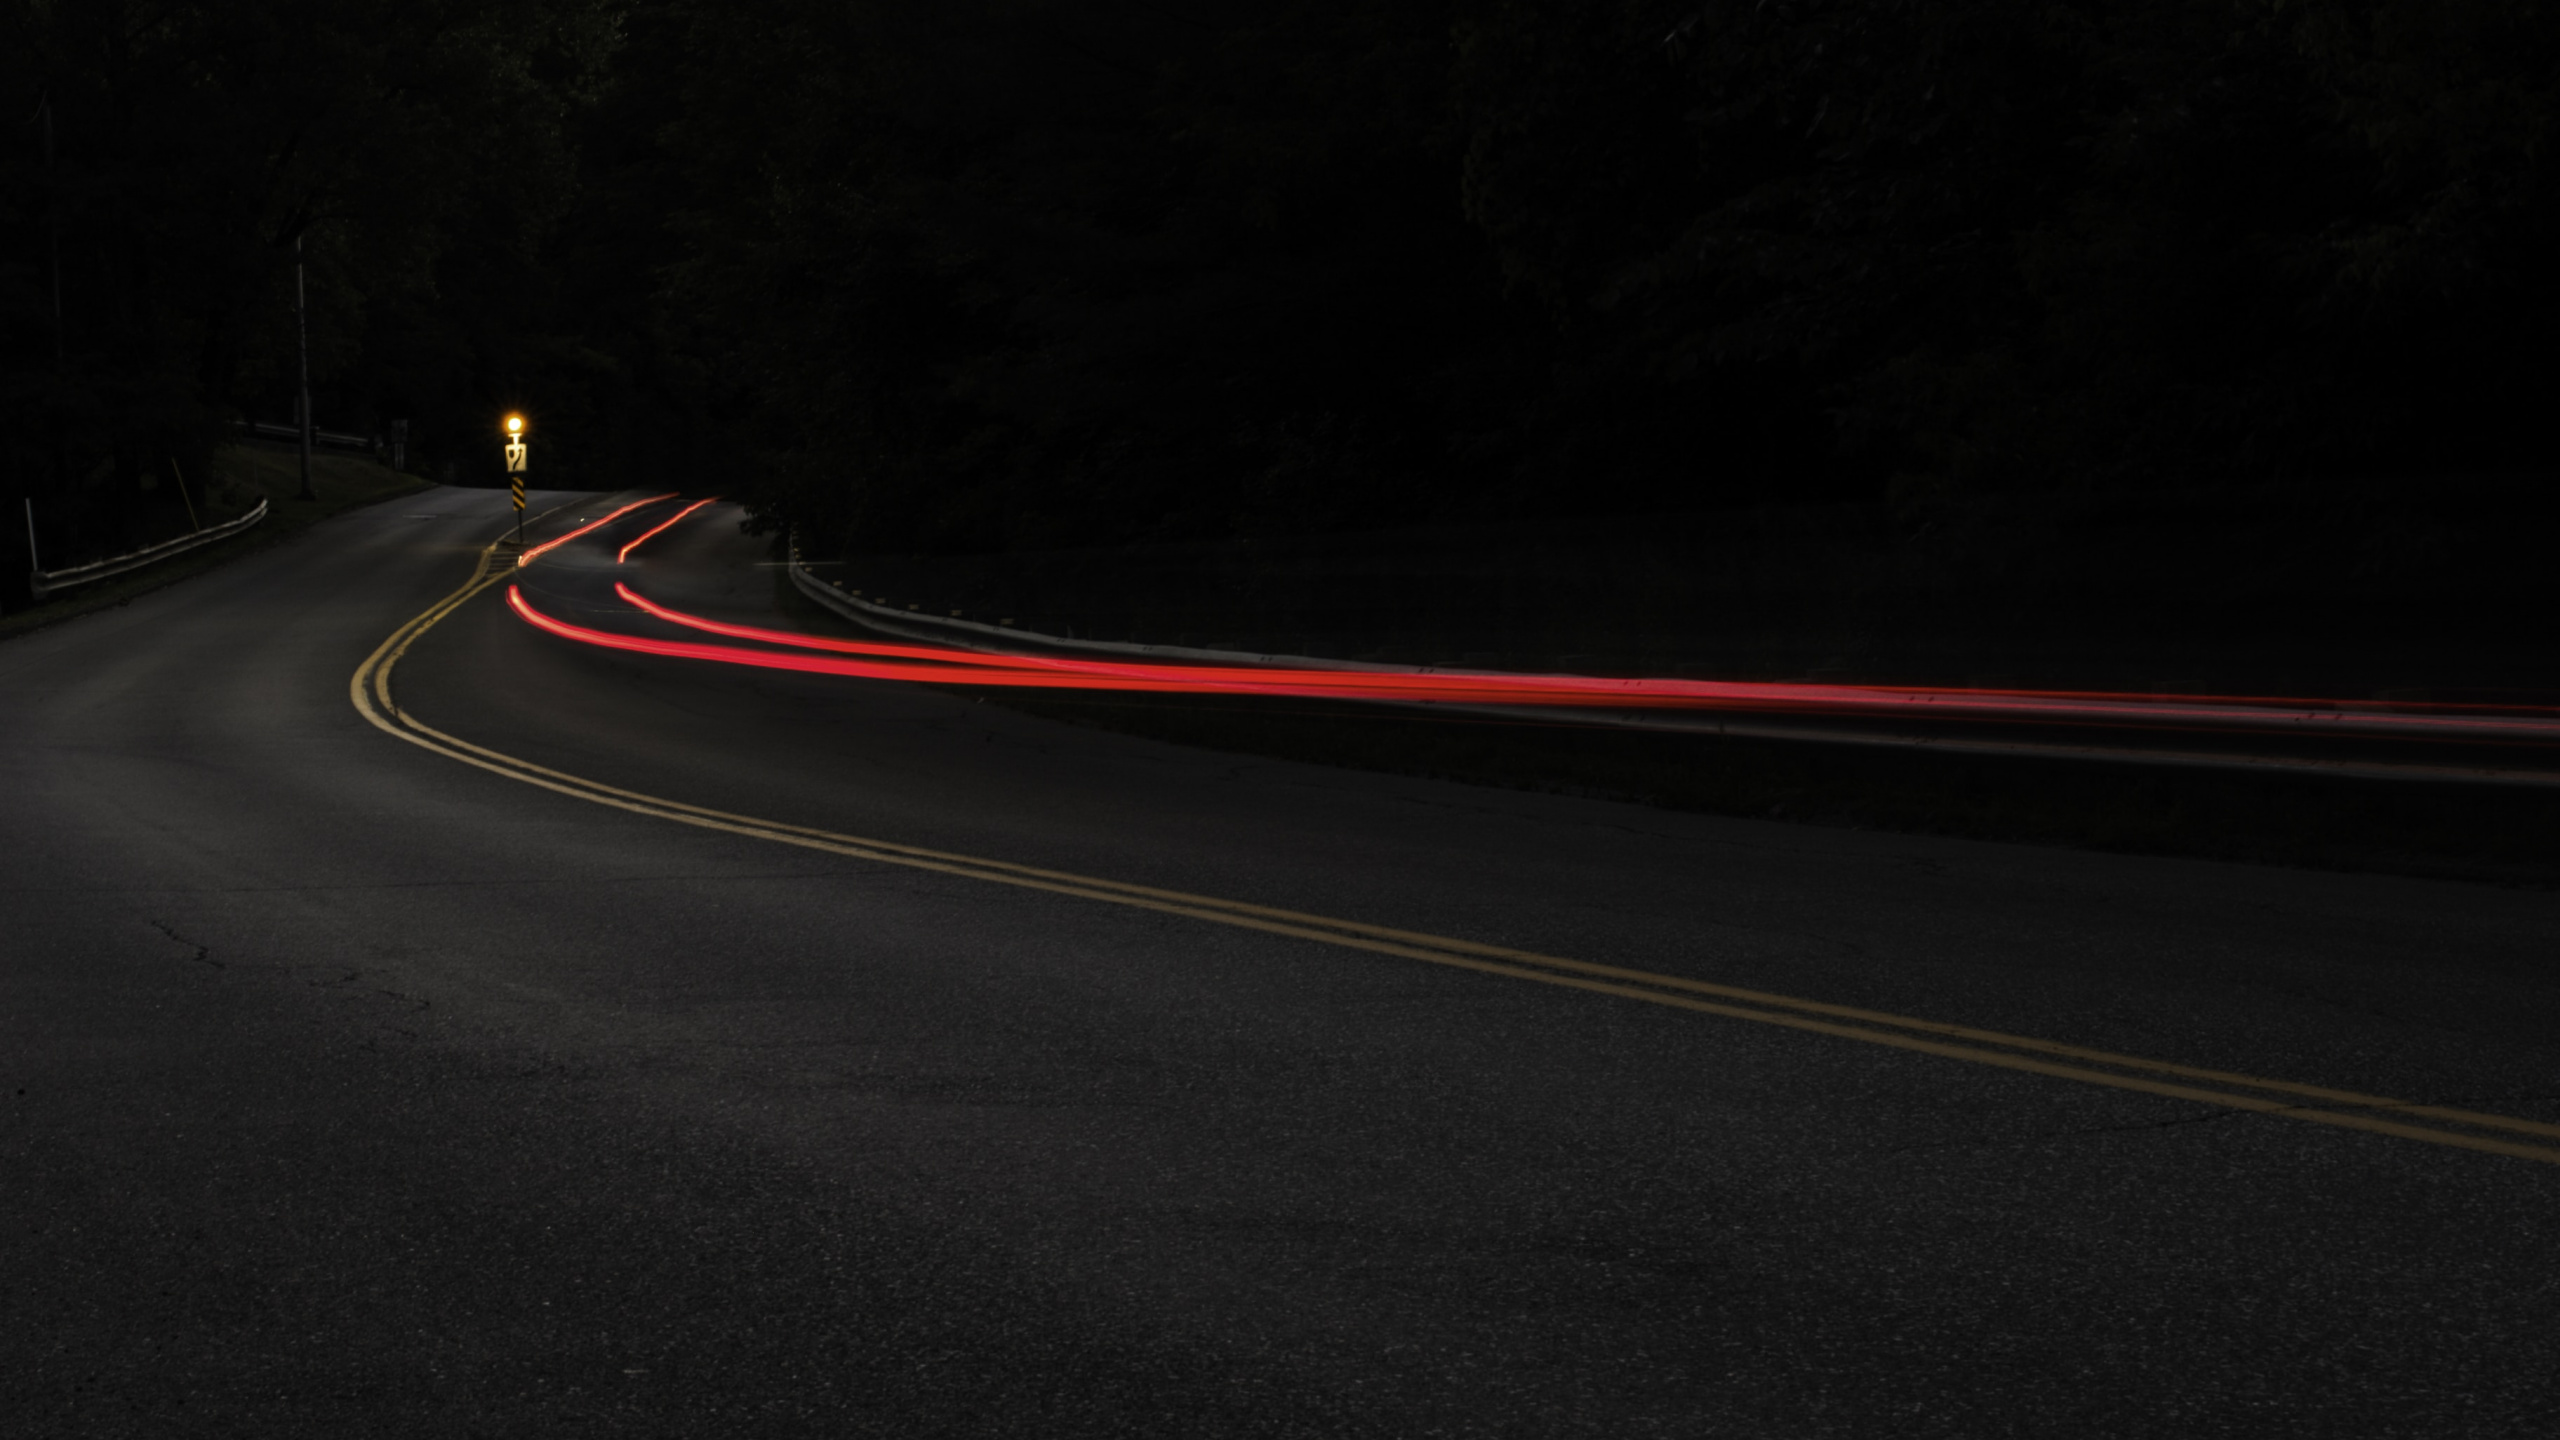 Time Lapse Photography of Road During Night Time. Wallpaper in 2560x1440 Resolution